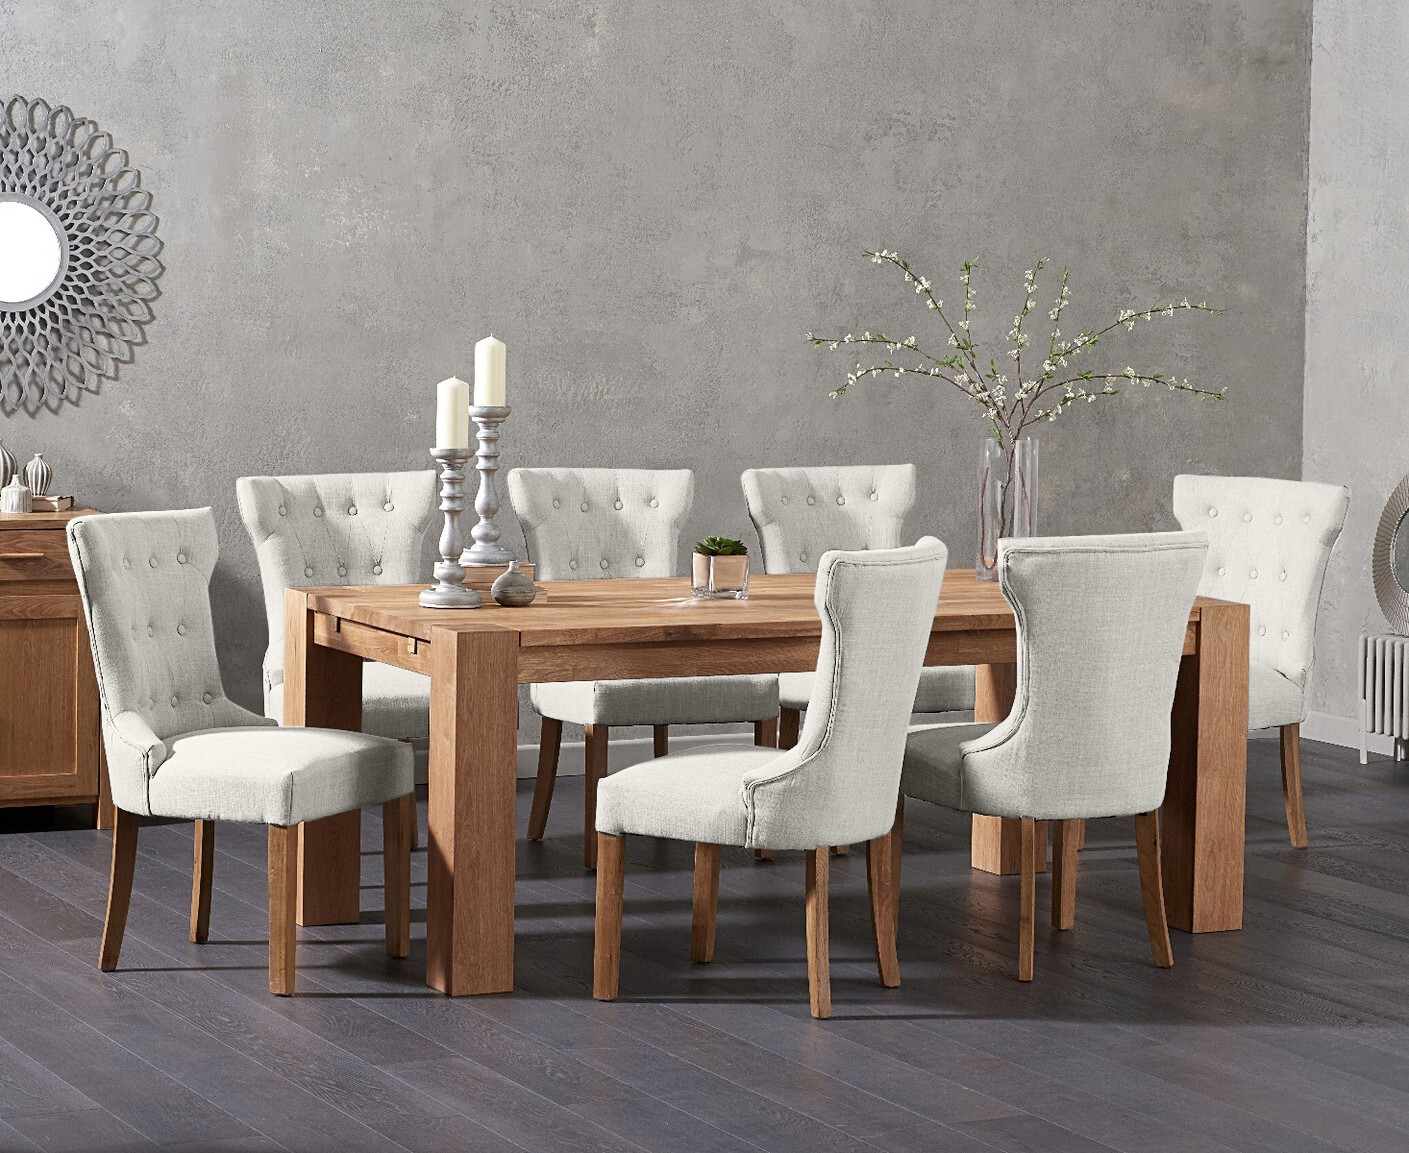 Photo 2 of Sheringham 200cm solid oak dining table with 6 grey clara chairs